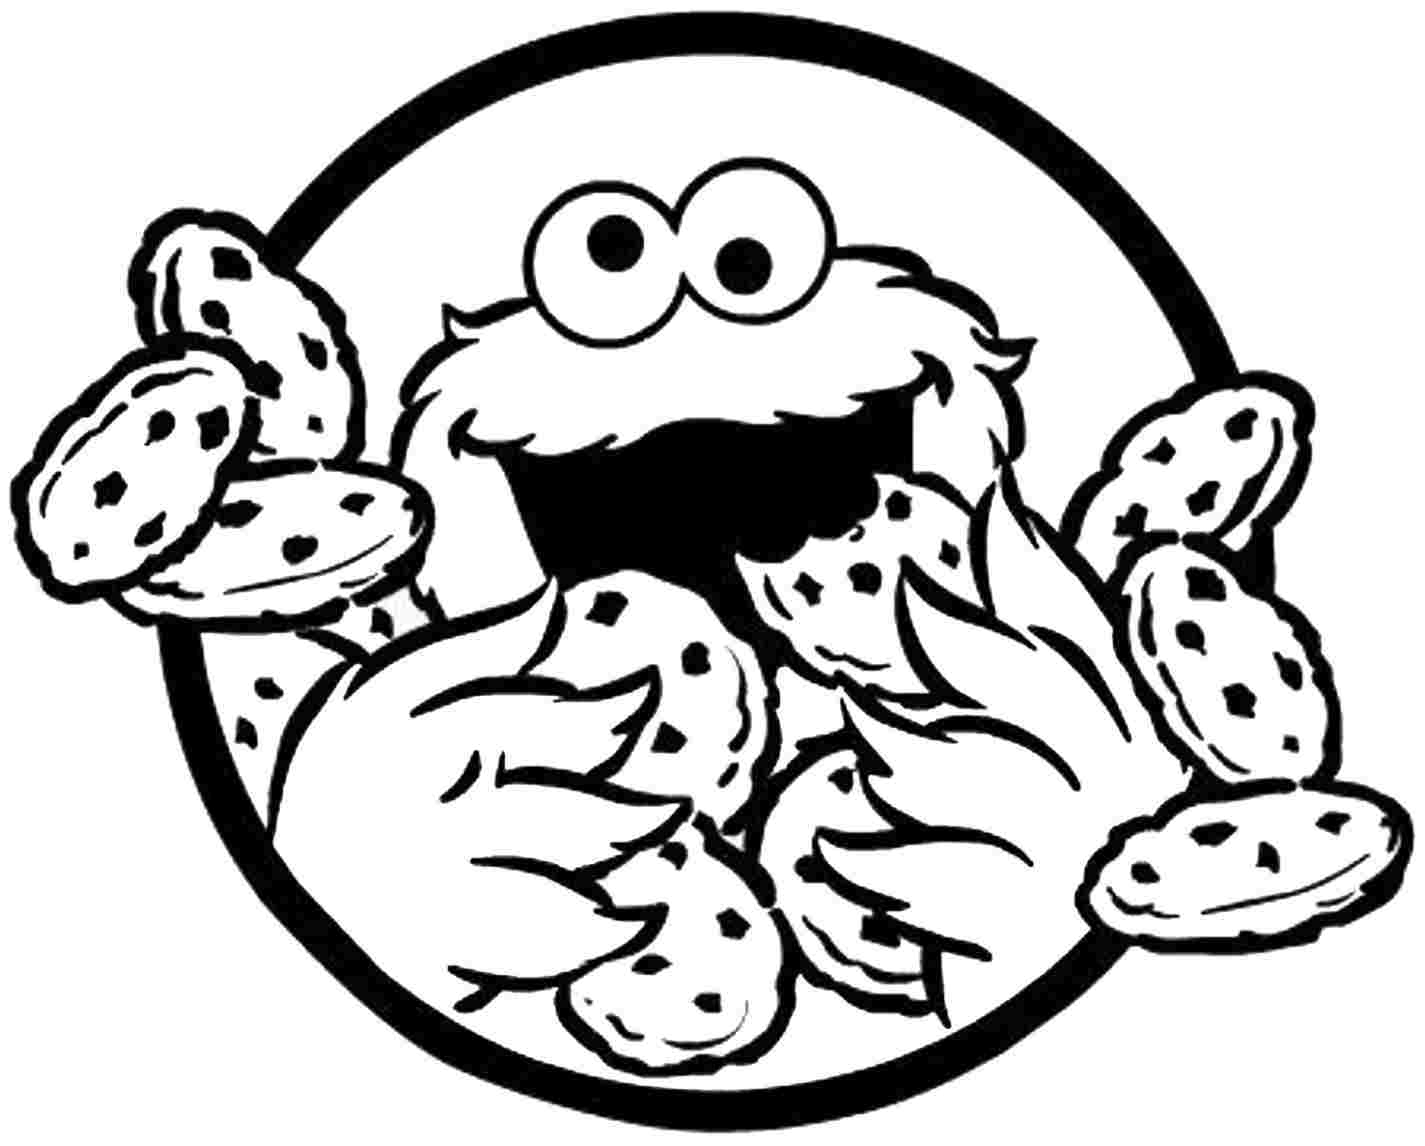 Cookie monster cokie monster coloring page coloring pages for kids and printable clipart